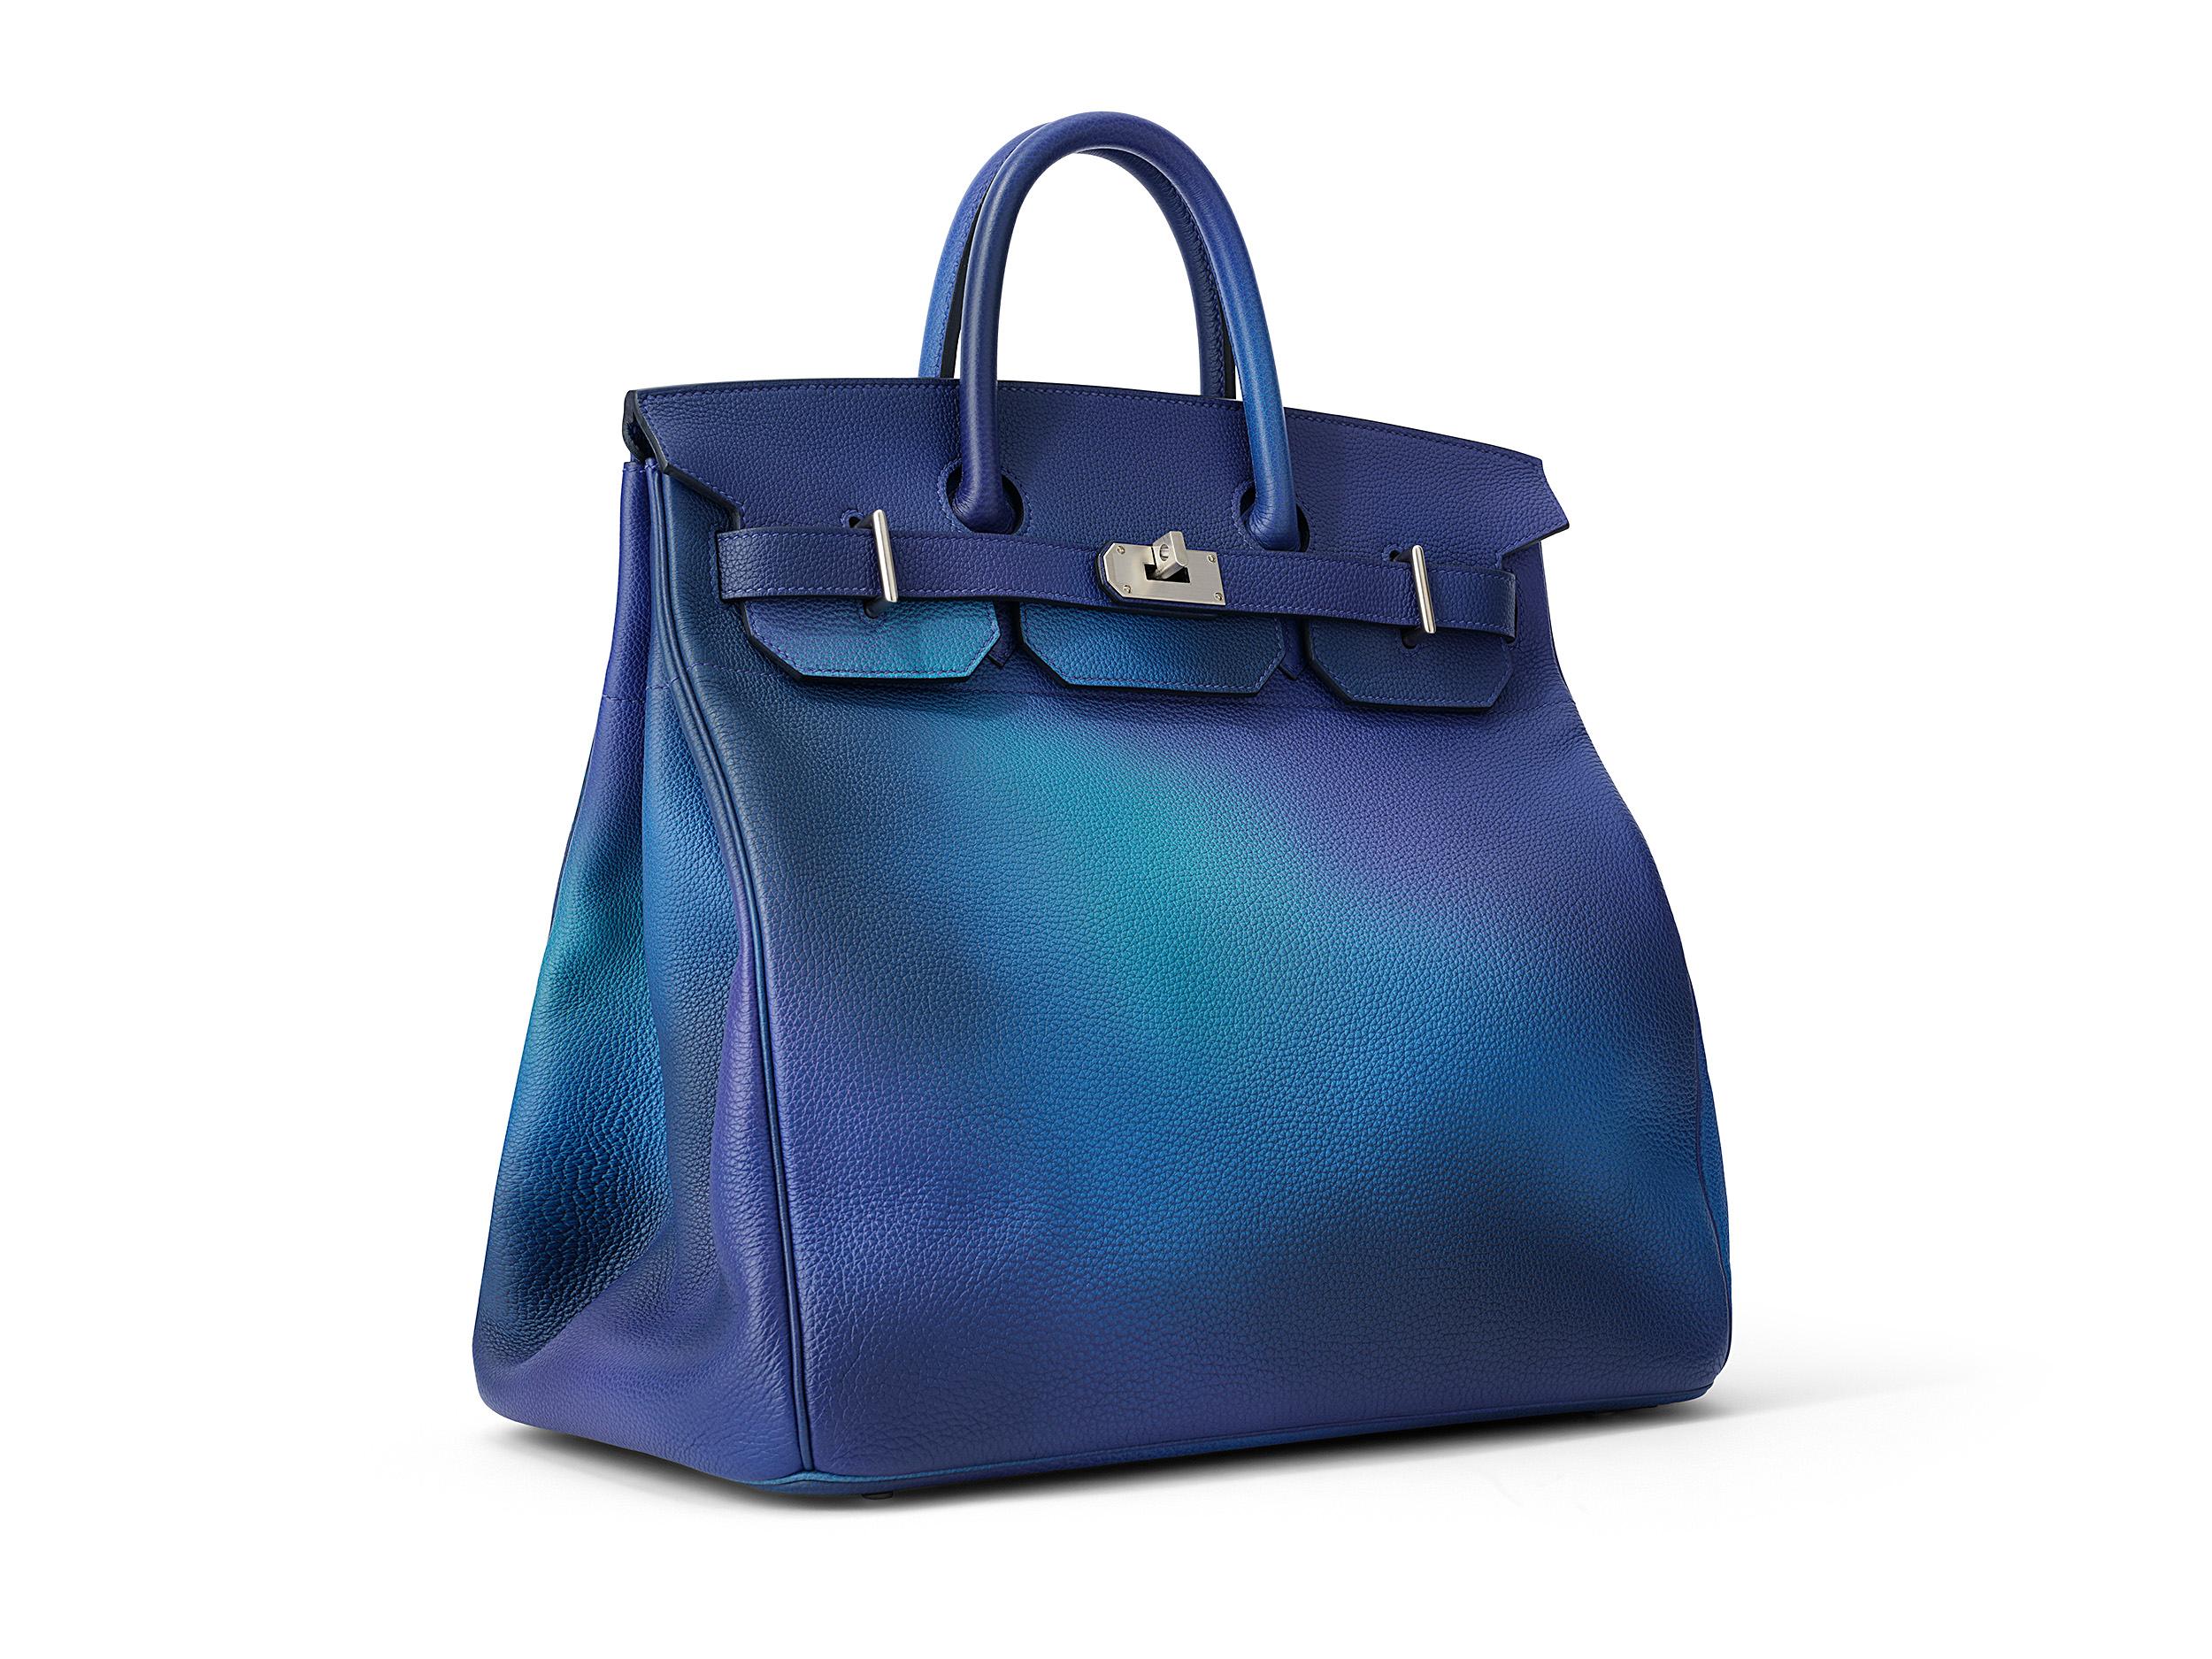 Hermès Birkin HAC Cosmos 40 in bleu nuit and togo leather with palladium hardware. The bag is unworn and comes as full set including the original receipt.  Stamp Y (2020) 

